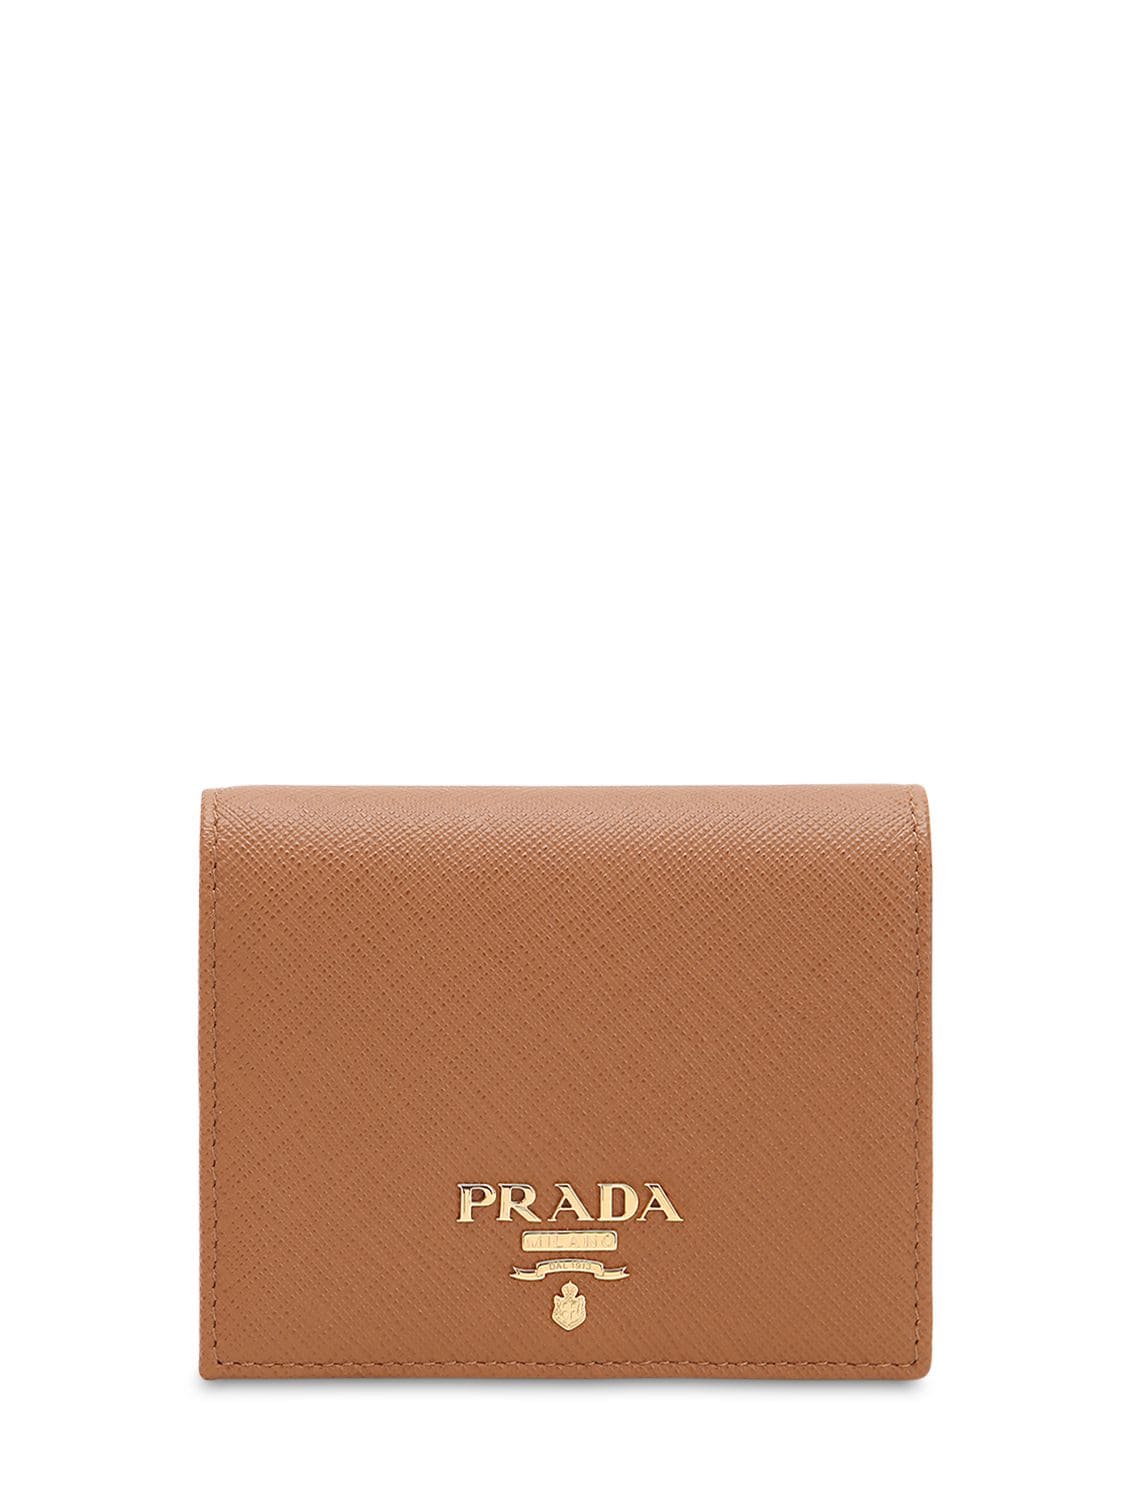 Prada Small Leather Wallet In Caramel